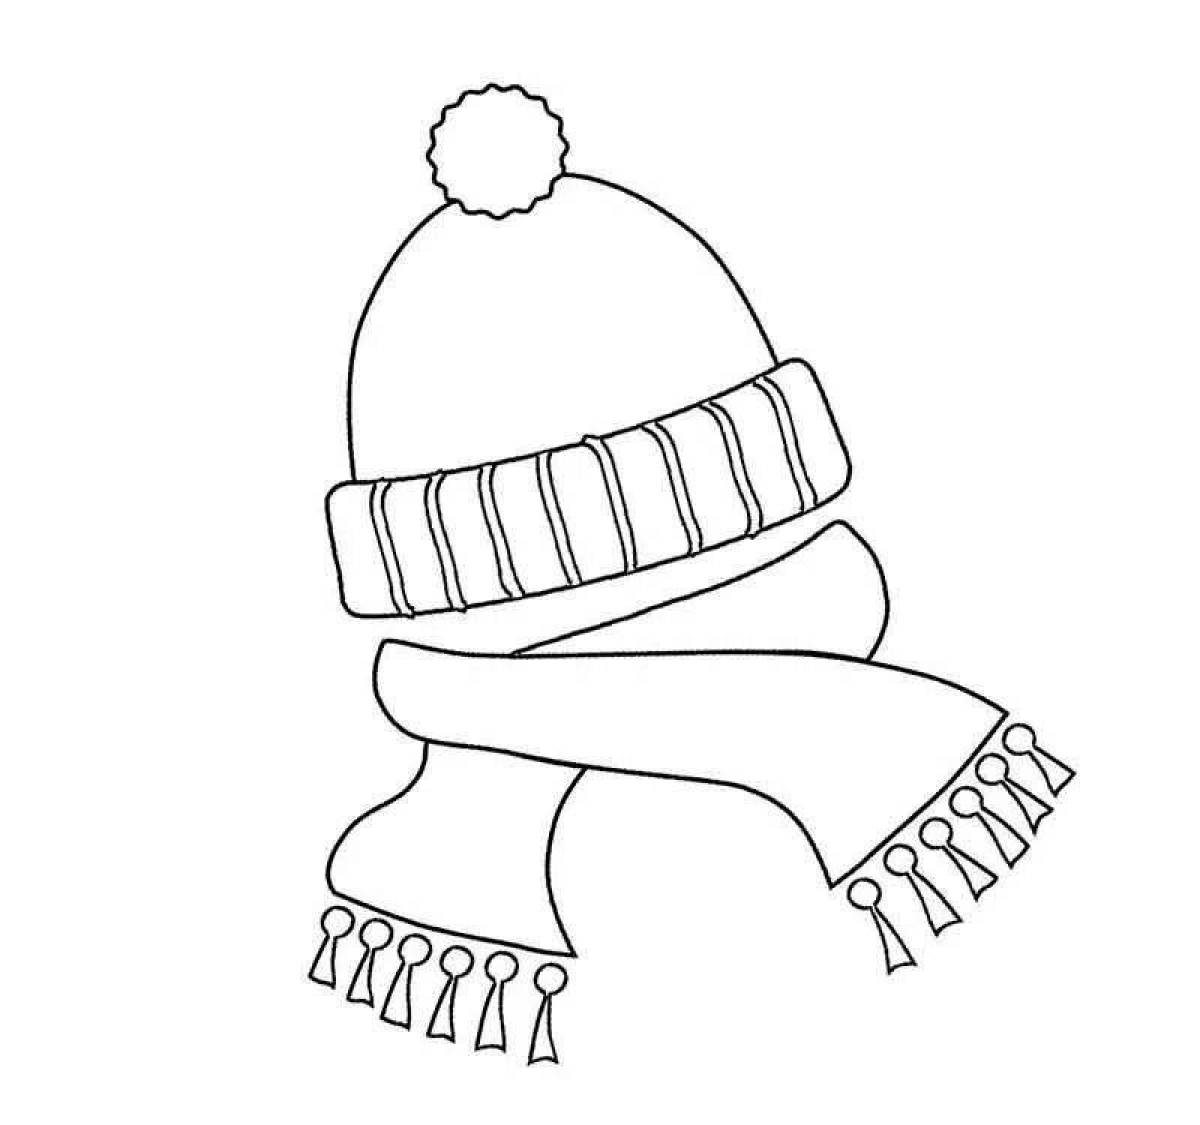 Colorful hat and scarf coloring pages for kids